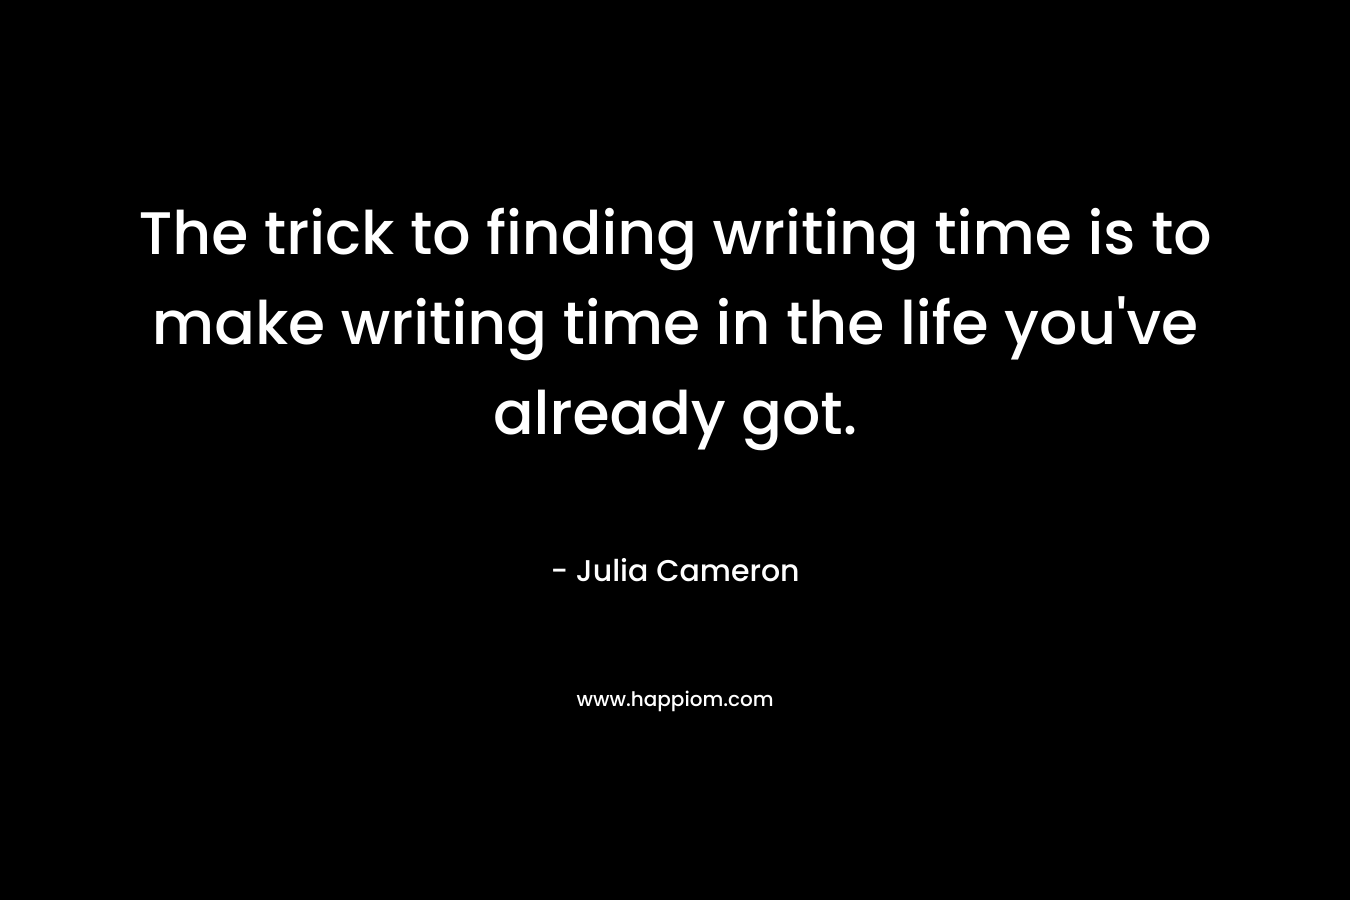 The trick to finding writing time is to make writing time in the life you’ve already got. – Julia Cameron